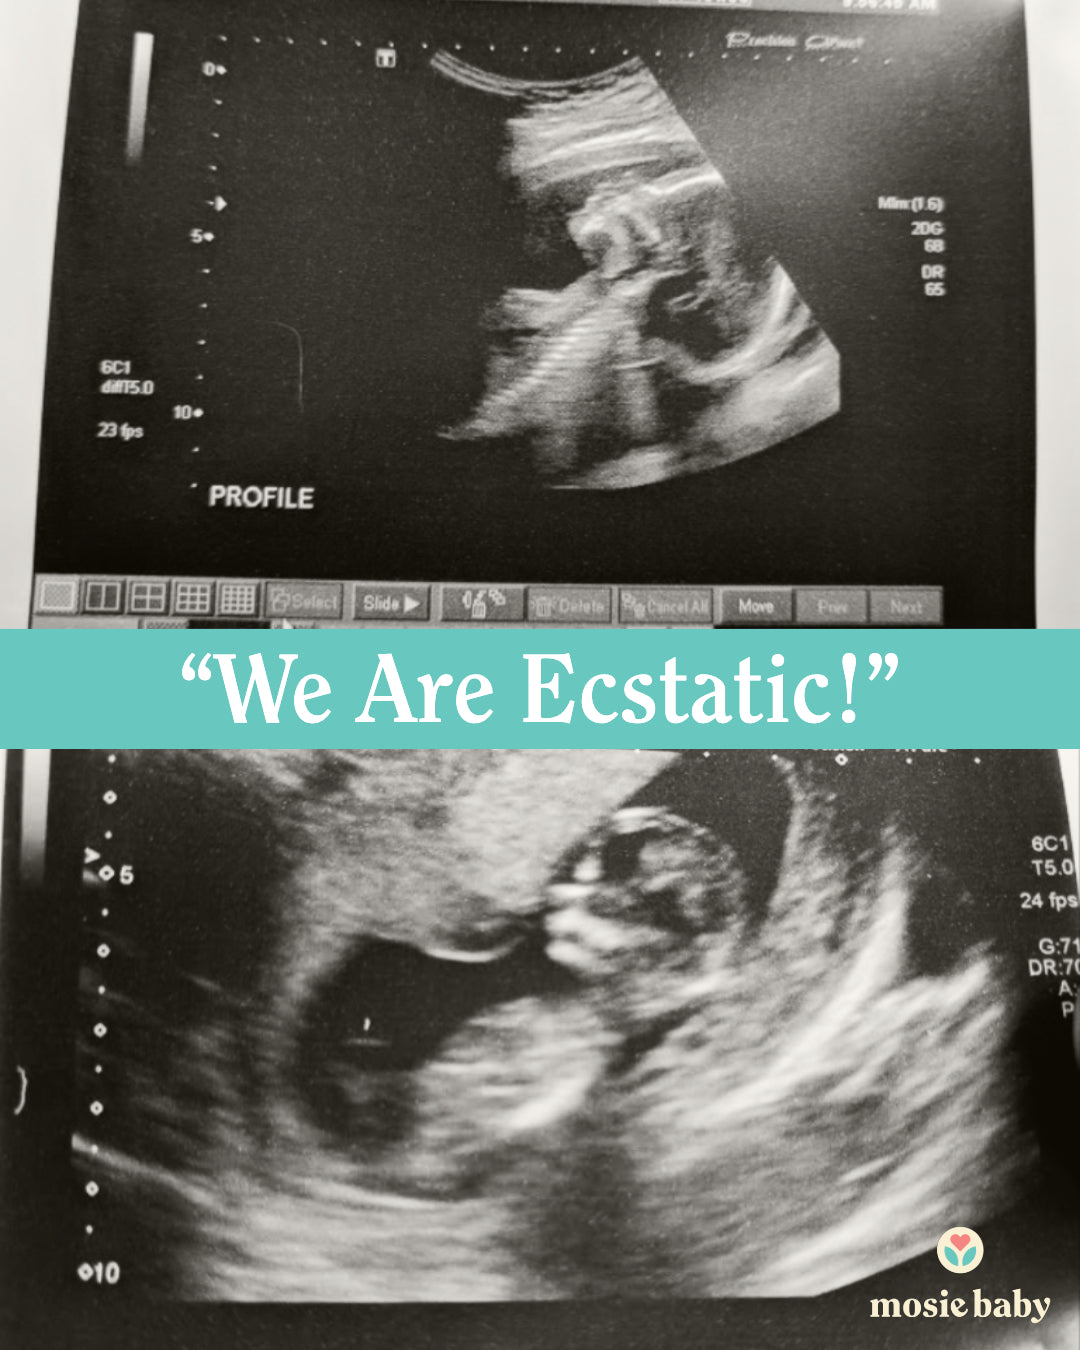 Sonogram of a Mosie Baby with the quote "we are ecstatic!"